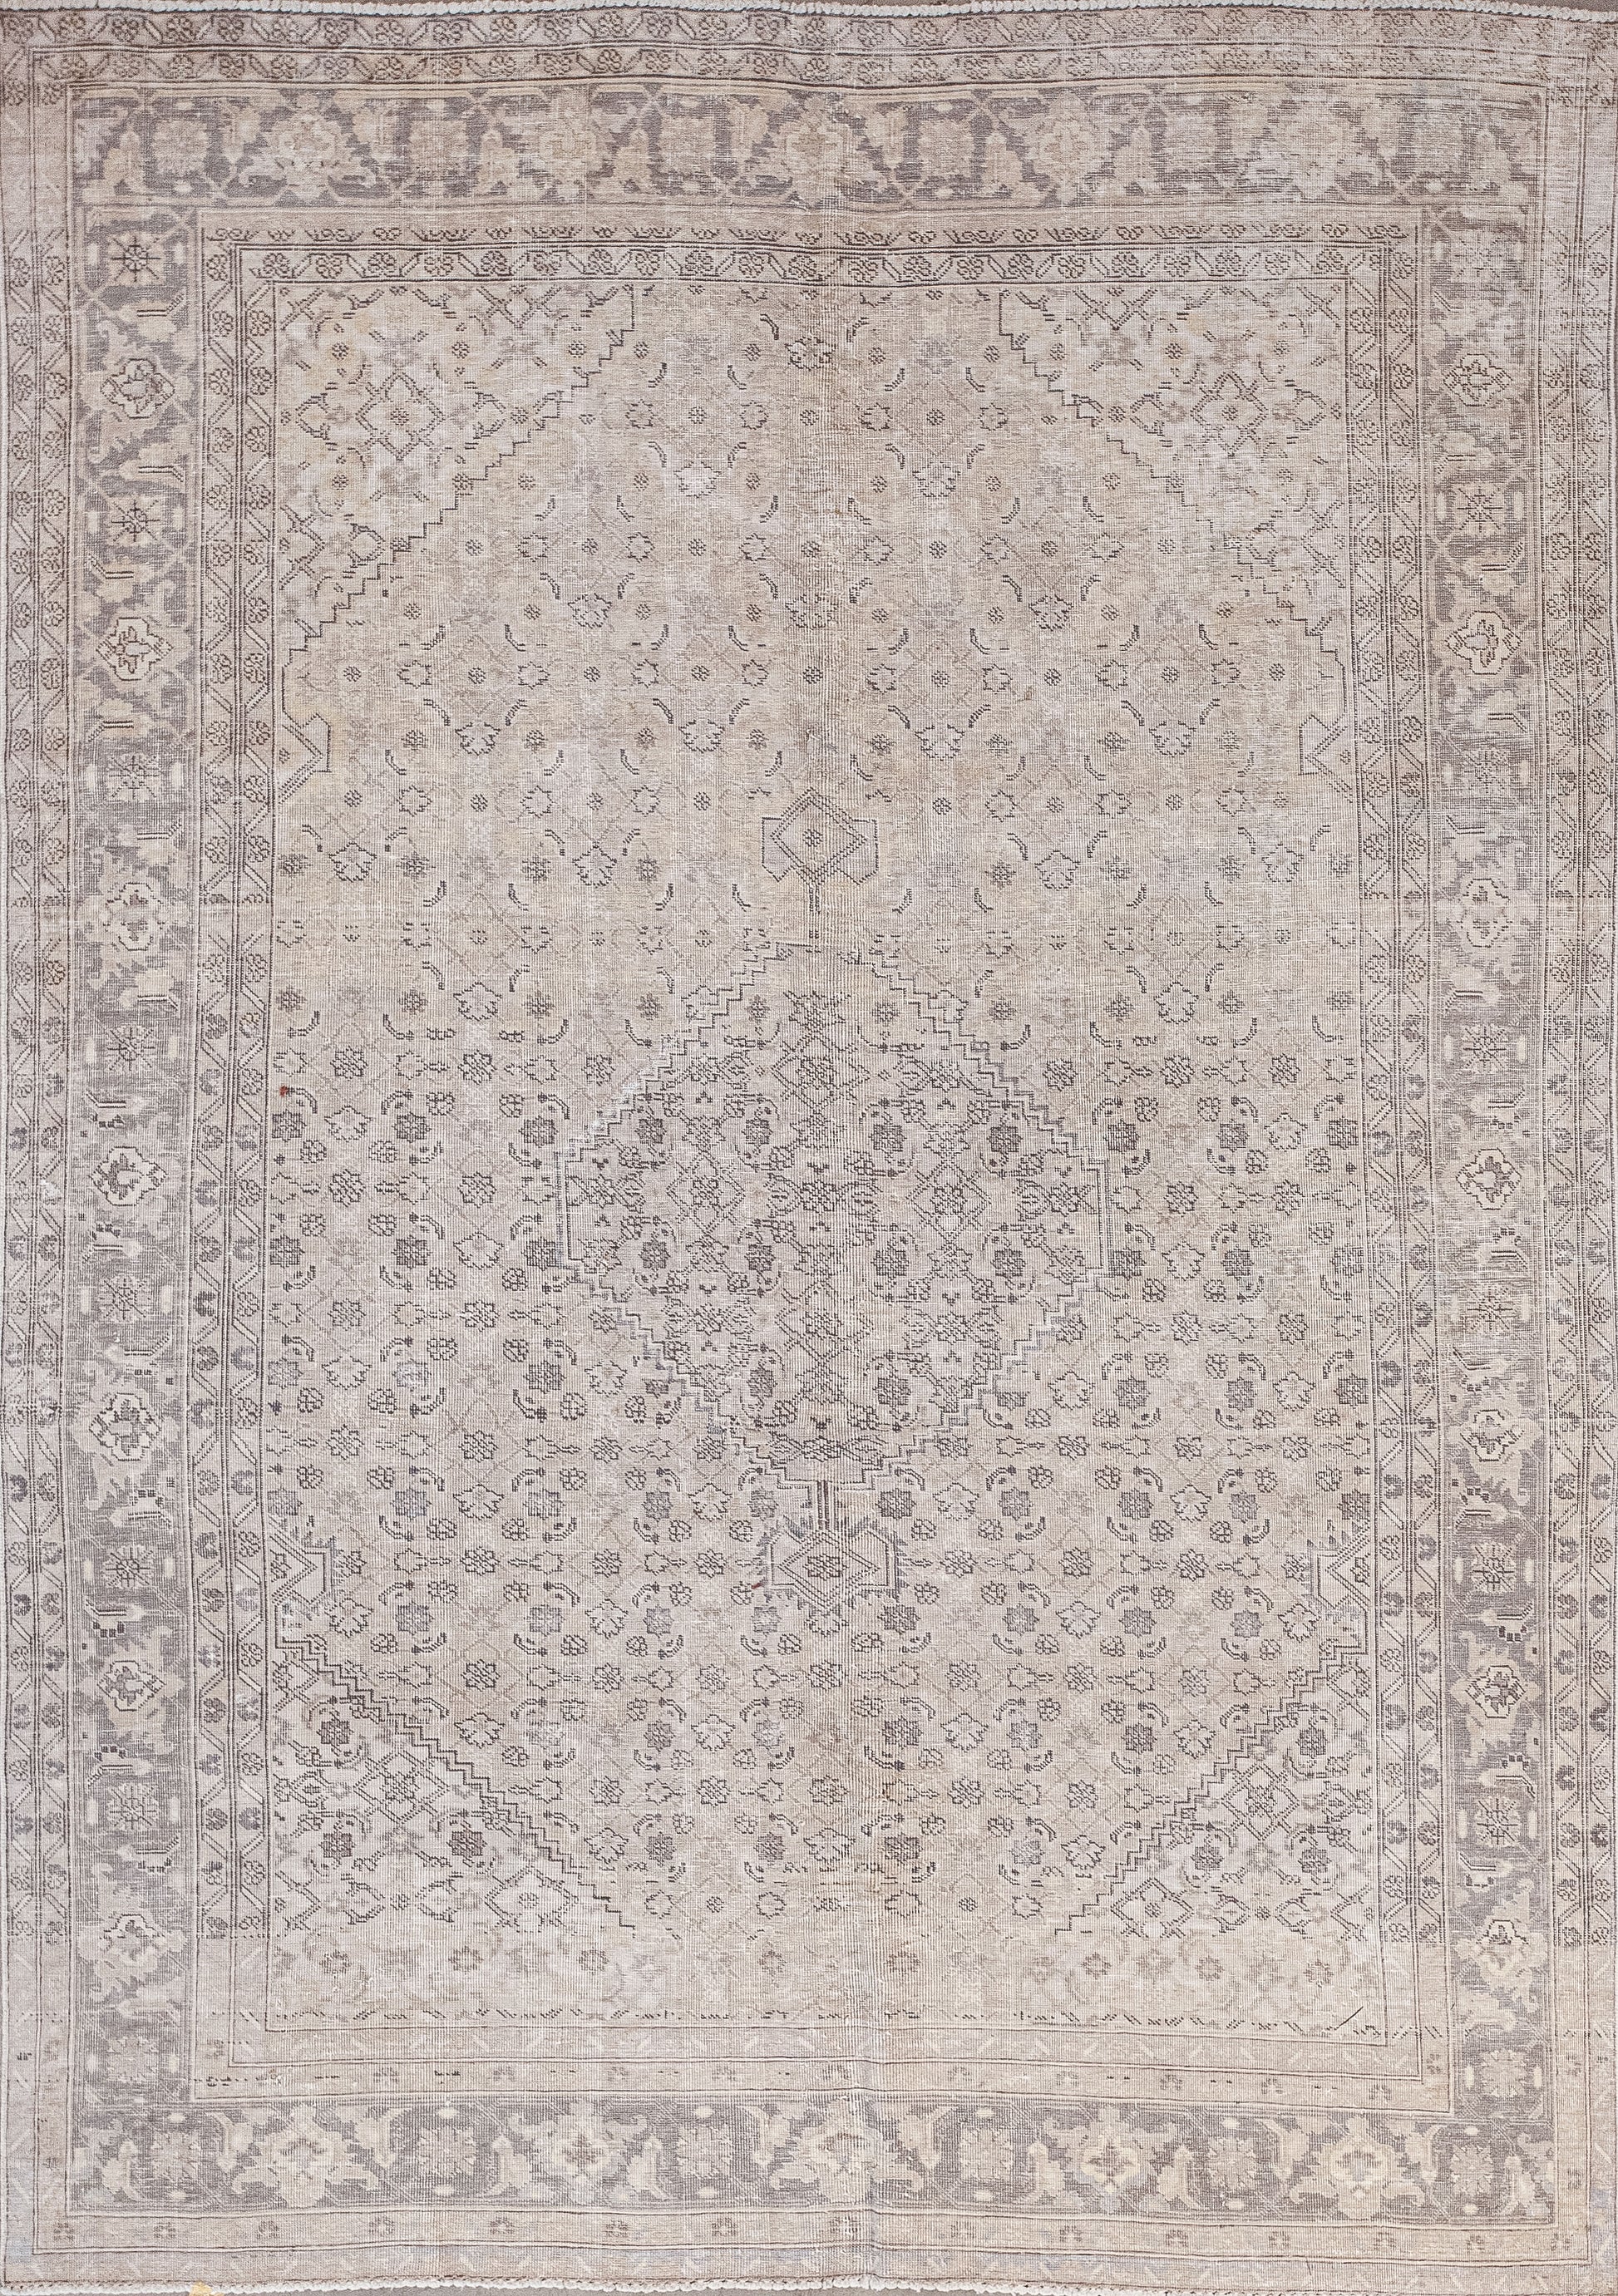 Awe-inspiring carpet comes in different shades of beige such as; antique white, and champagne tone. This rug was woven with simple symmetrical patterns.